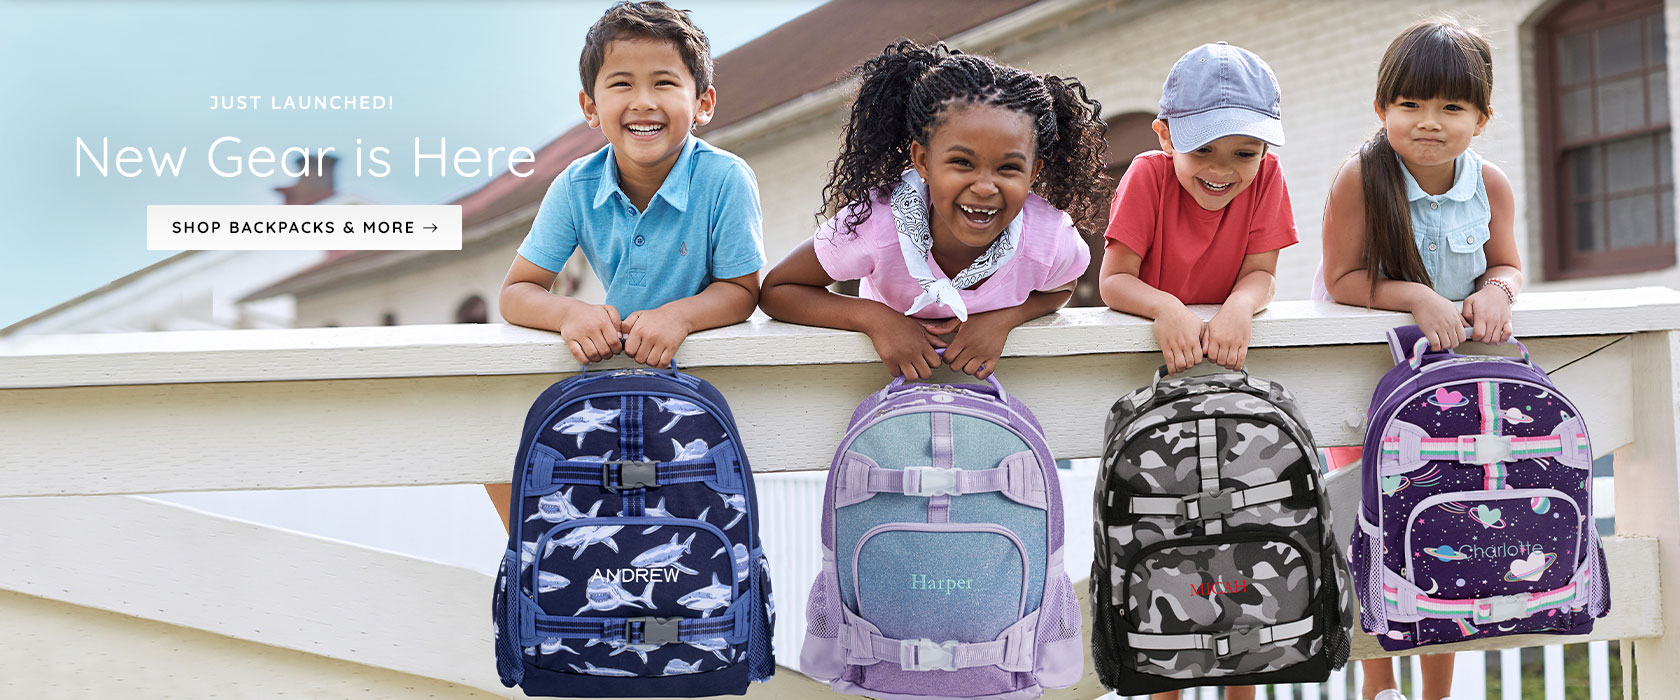 Just Launched! New Gear is Here - Shop Backpacks & More